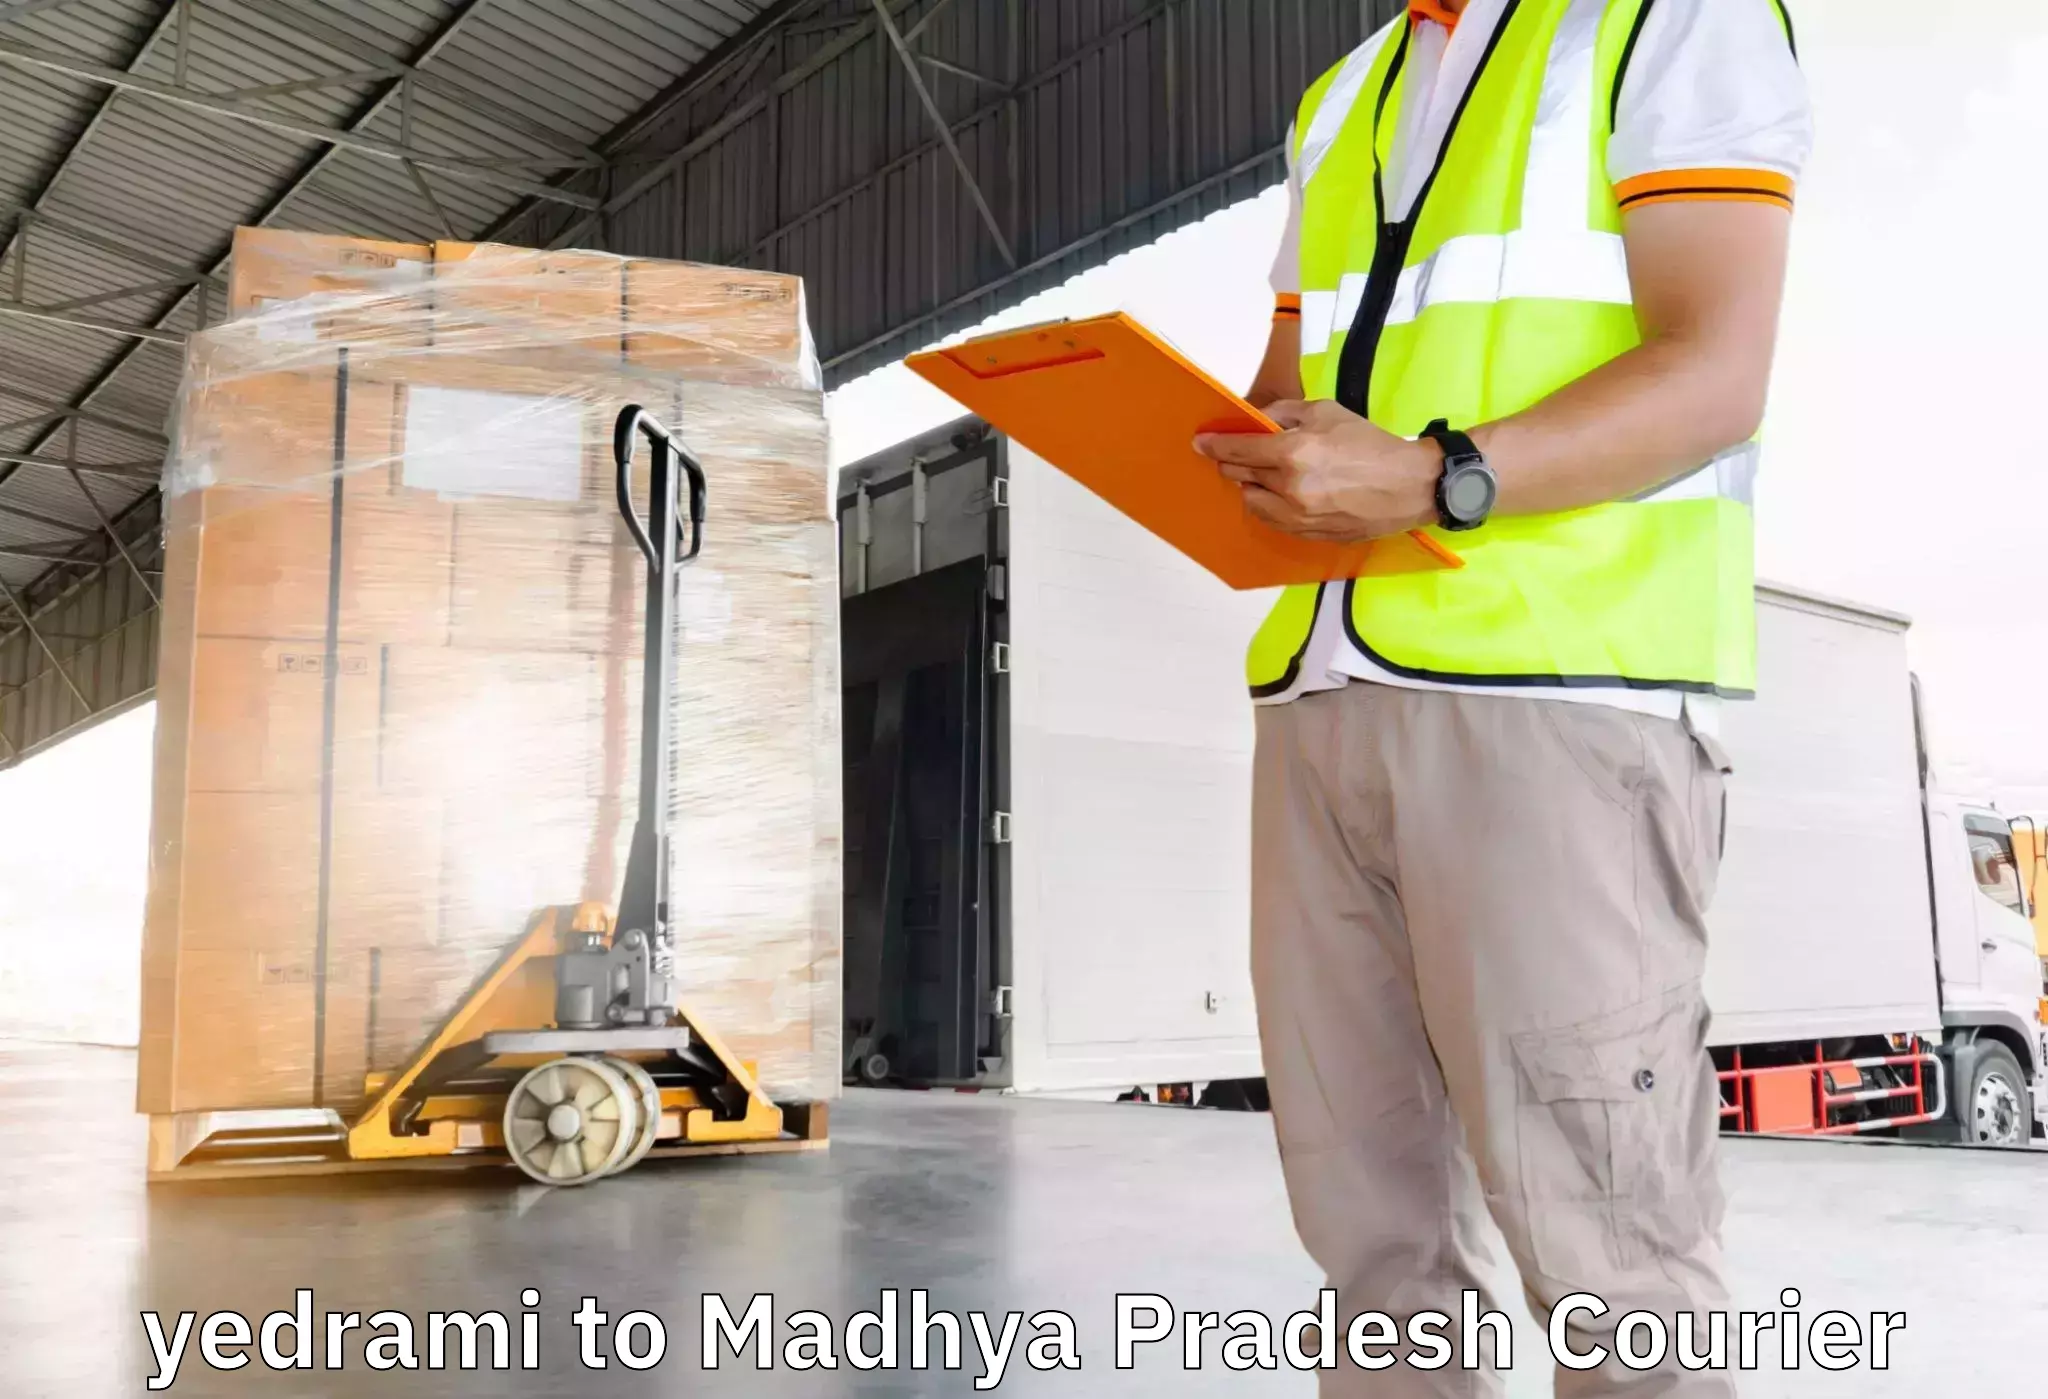 Quality relocation assistance yedrami to Lahar